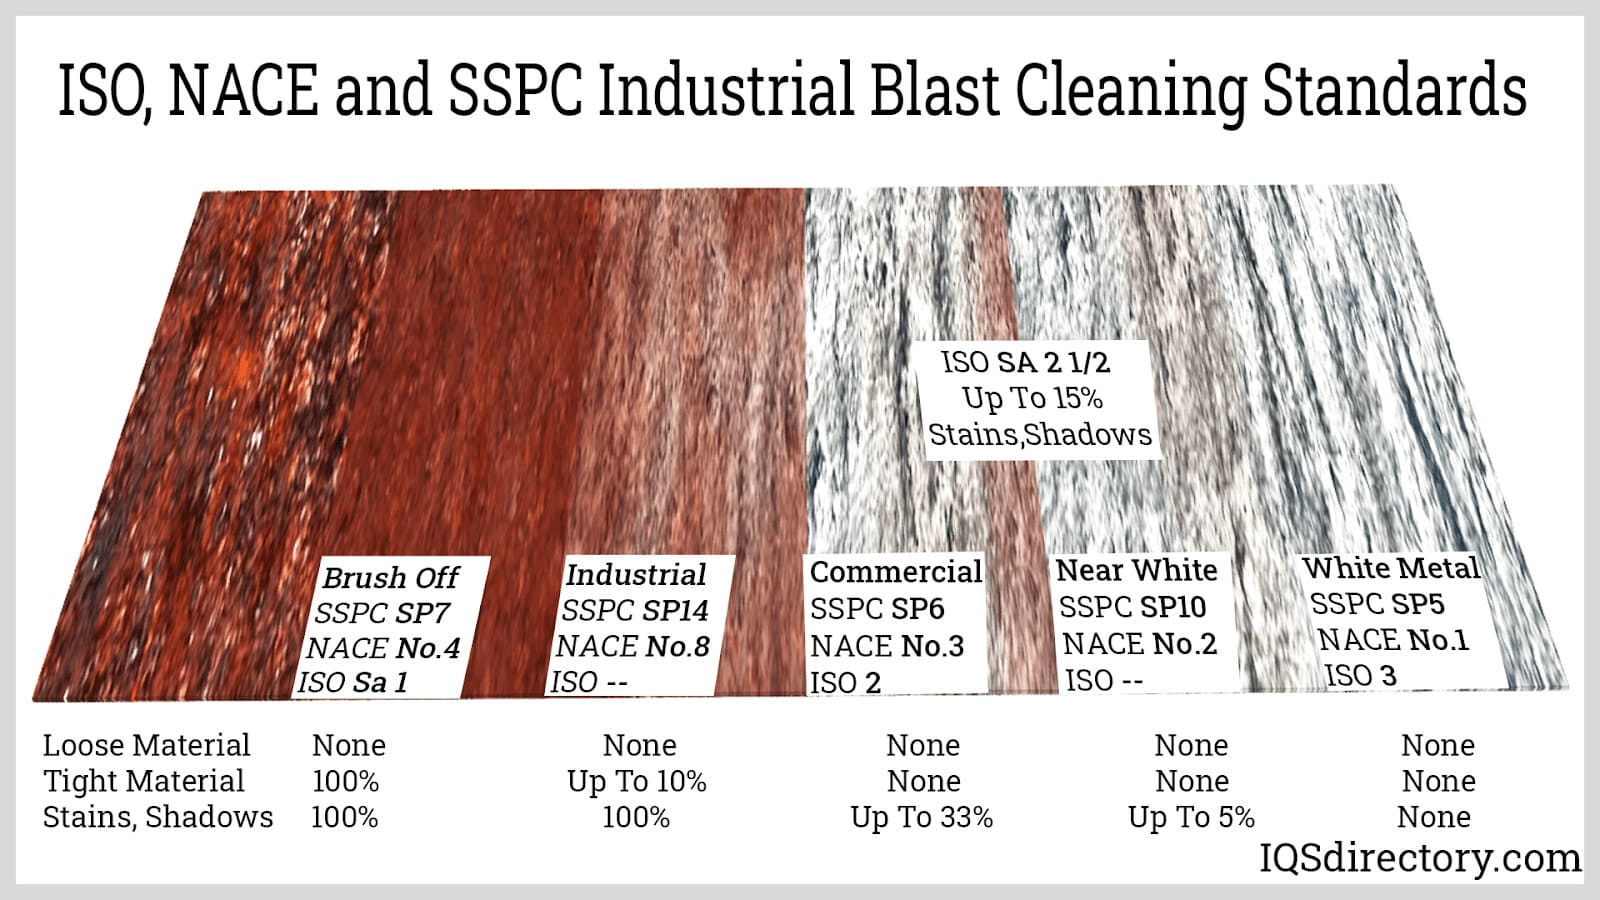 ISO, NACE and SSPC Industrial Blast Cleaning Standards